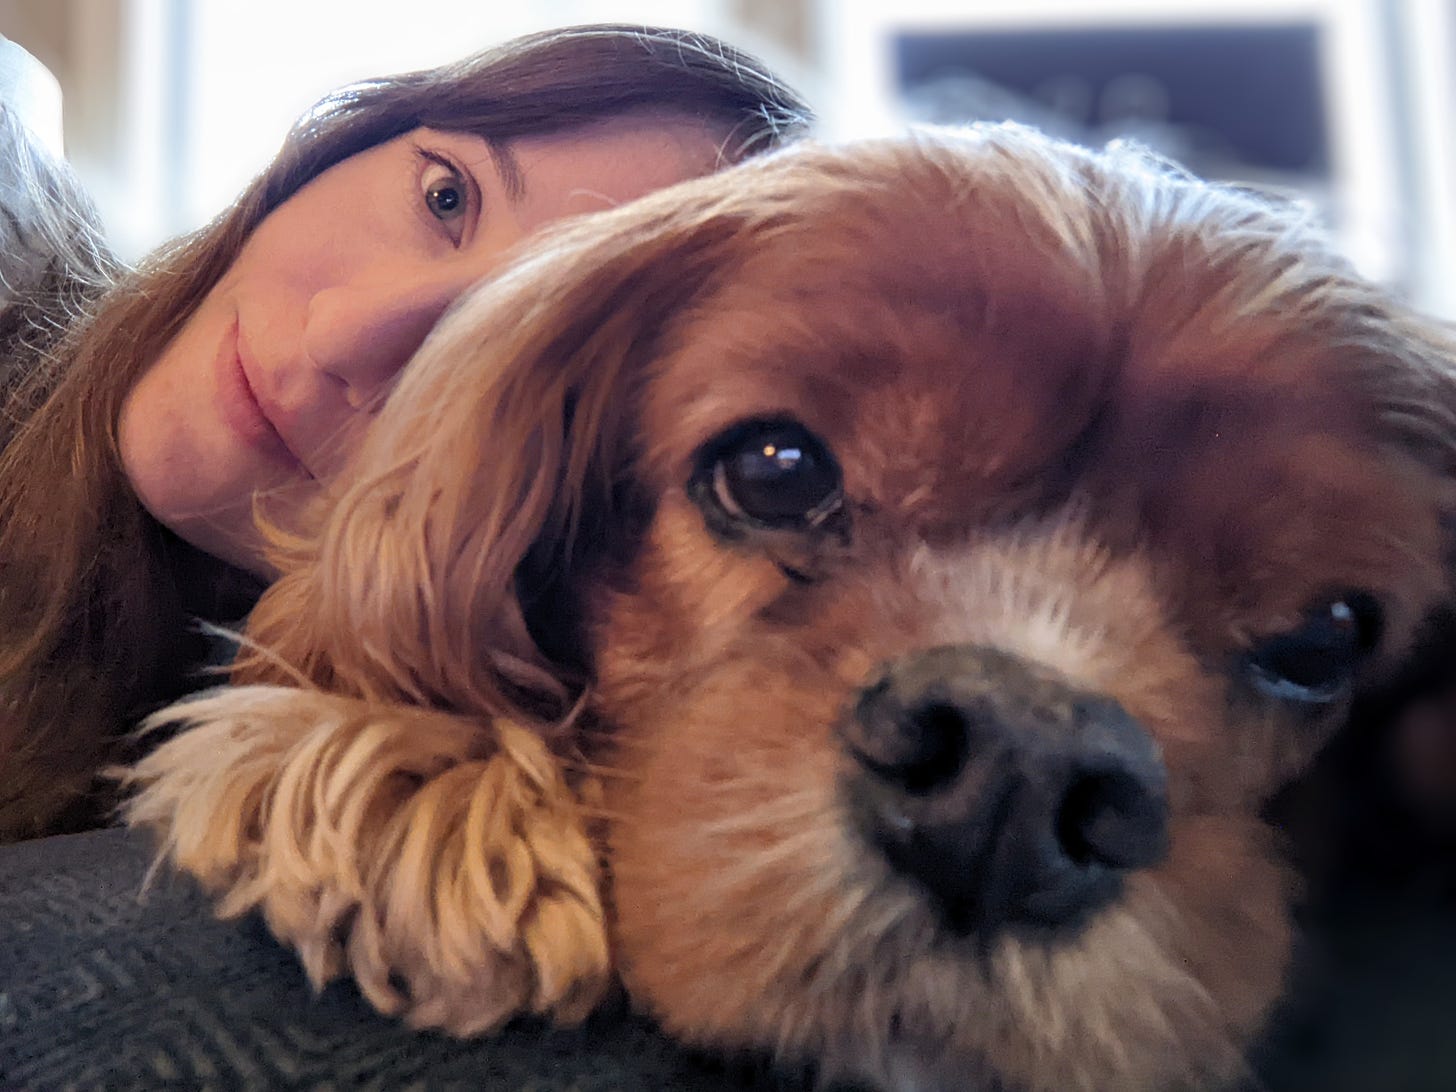 Emily, a white woman, leans her head on Finney, a ruby Cavailer King Charles Spaniel. They are both facing the camera and cuddling on the couch.